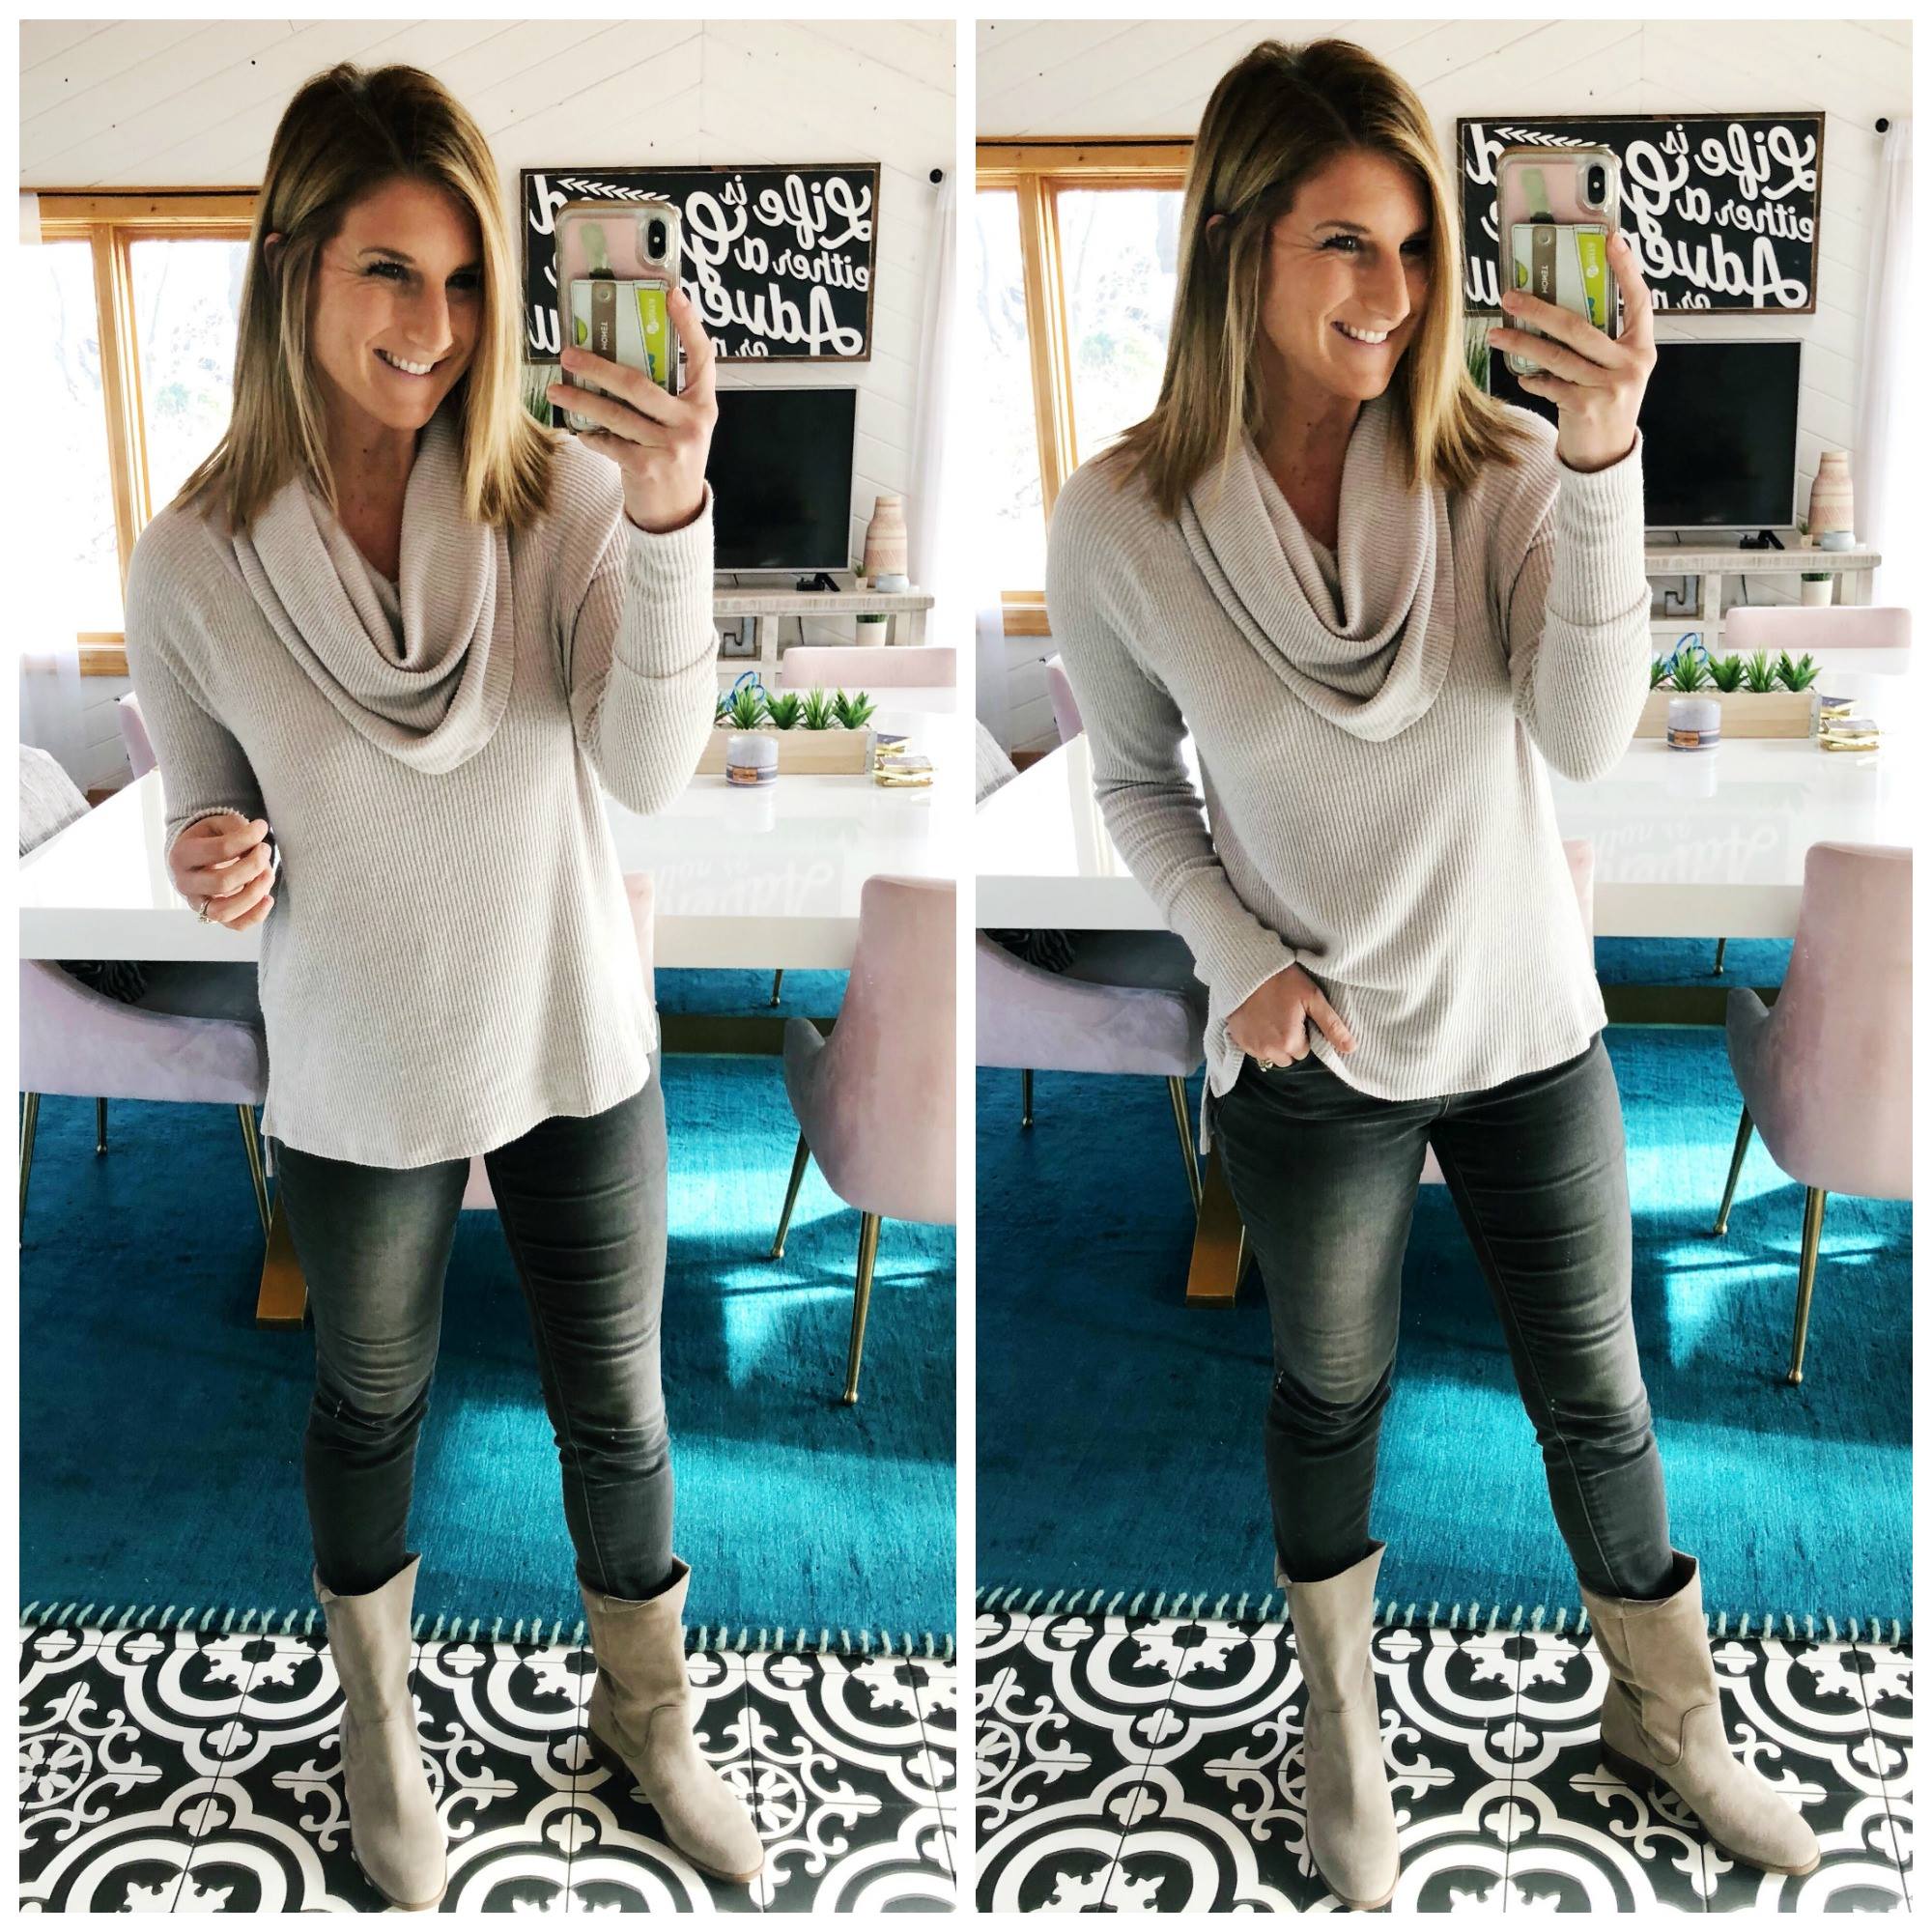 Slouchy Boot // Mid Calf Boot // Winter Style // Winter Fashion // Tunic and Jeans // Sole Society